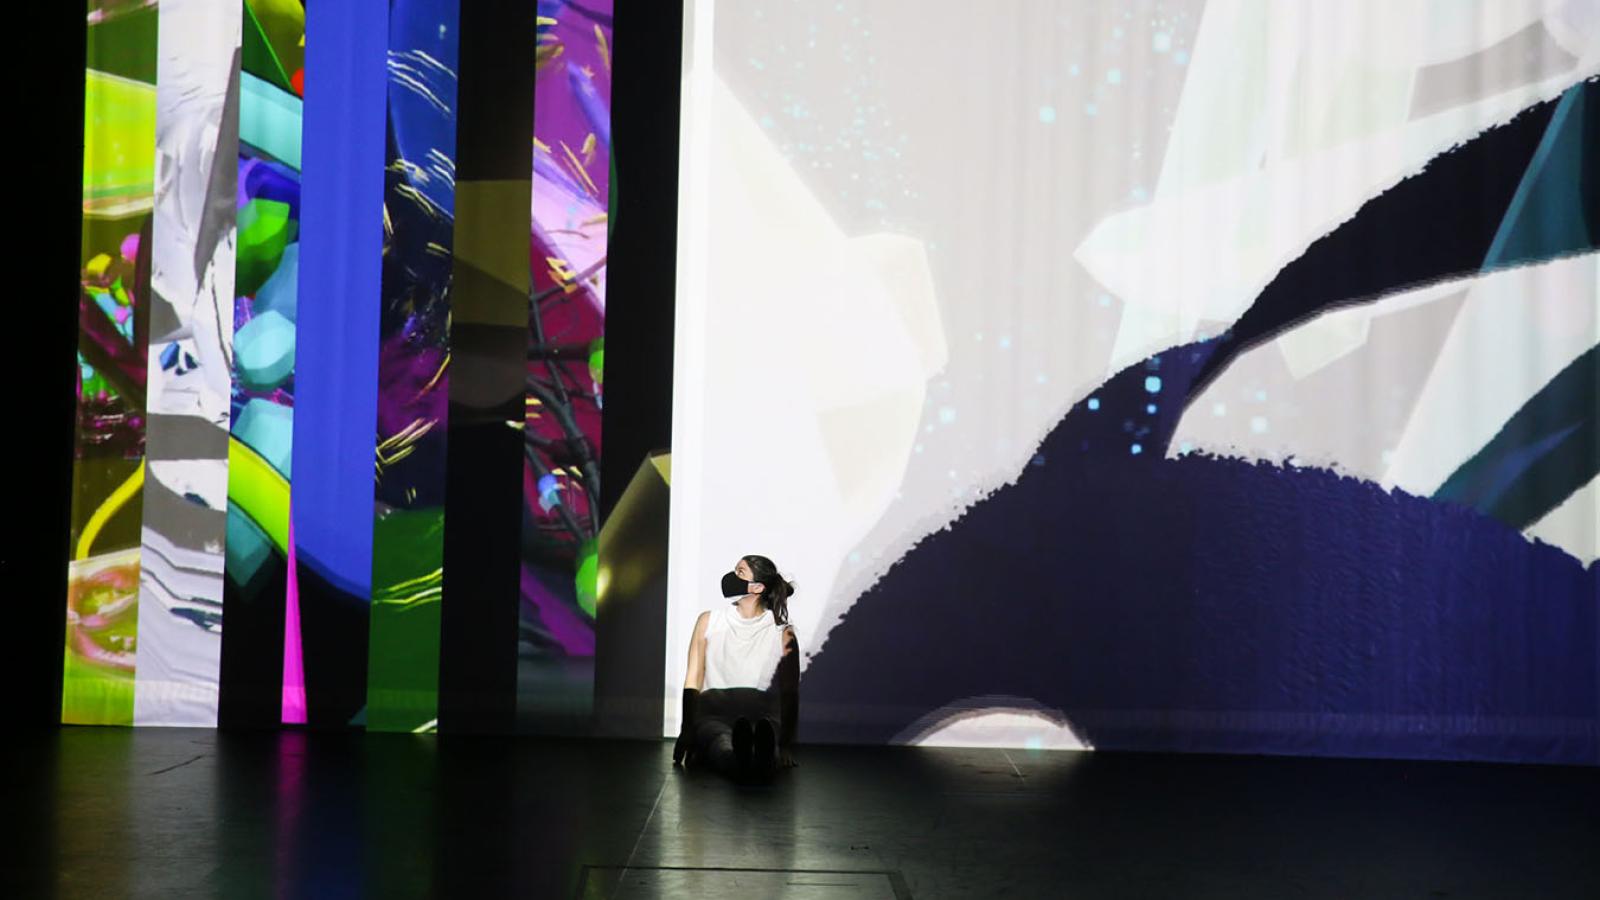 A dancer sits in front of a multicolored and layered image projection